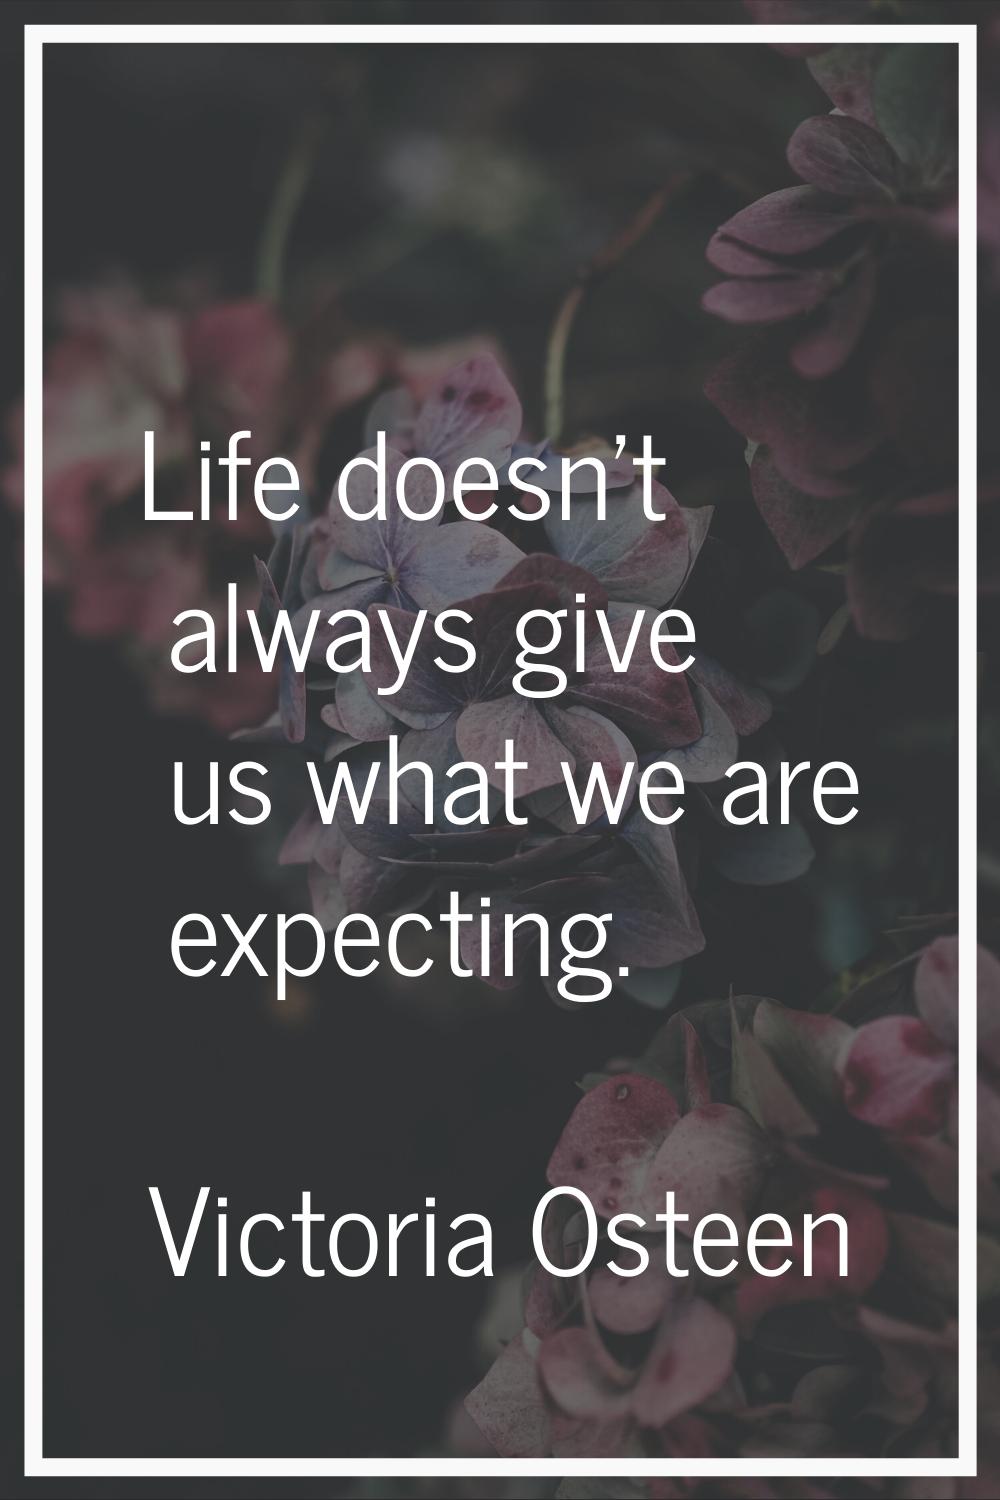 Life doesn't always give us what we are expecting.